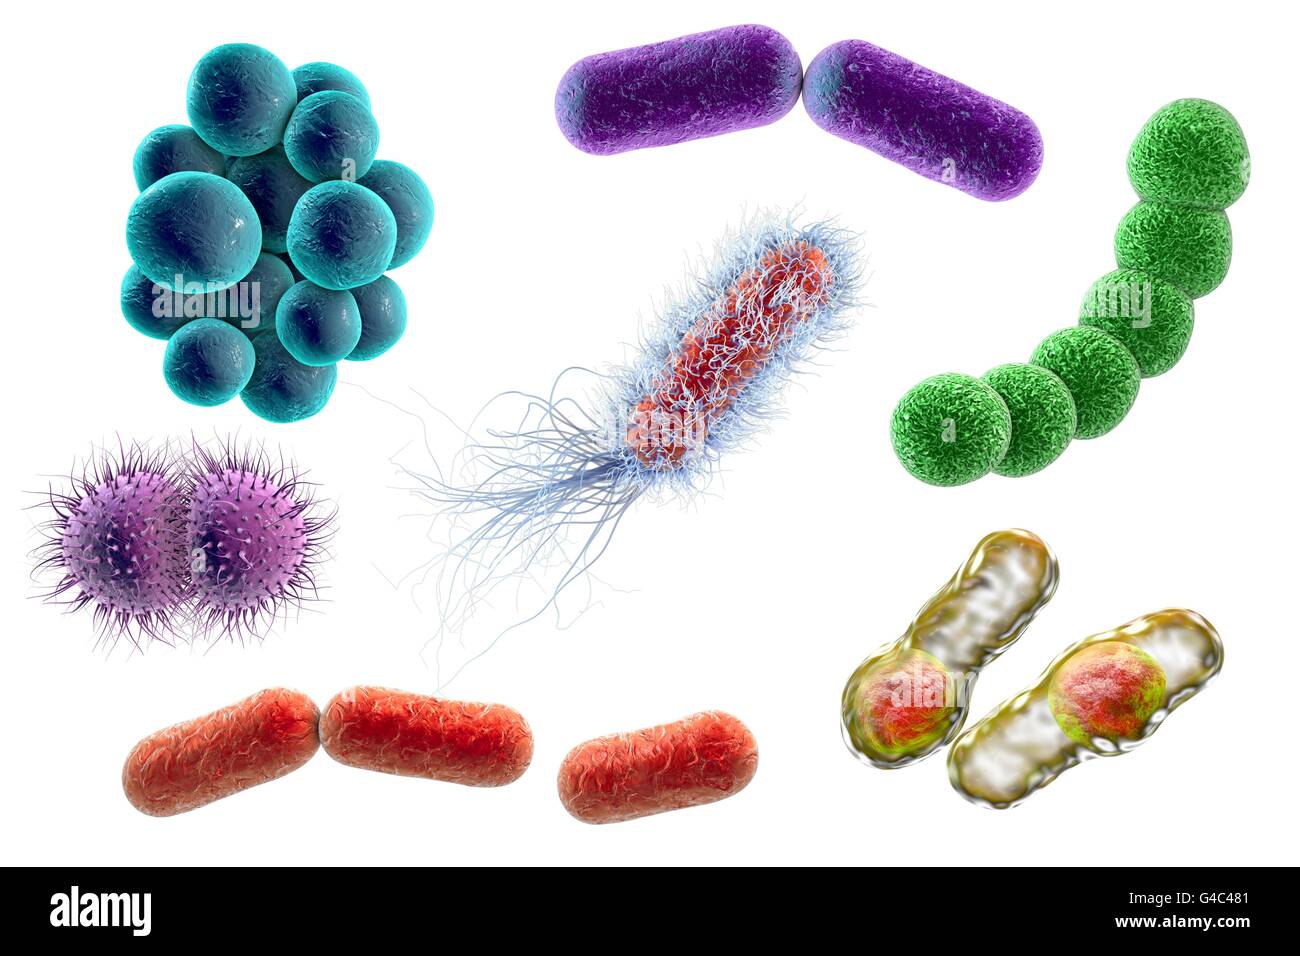 Bacteria And Their Names